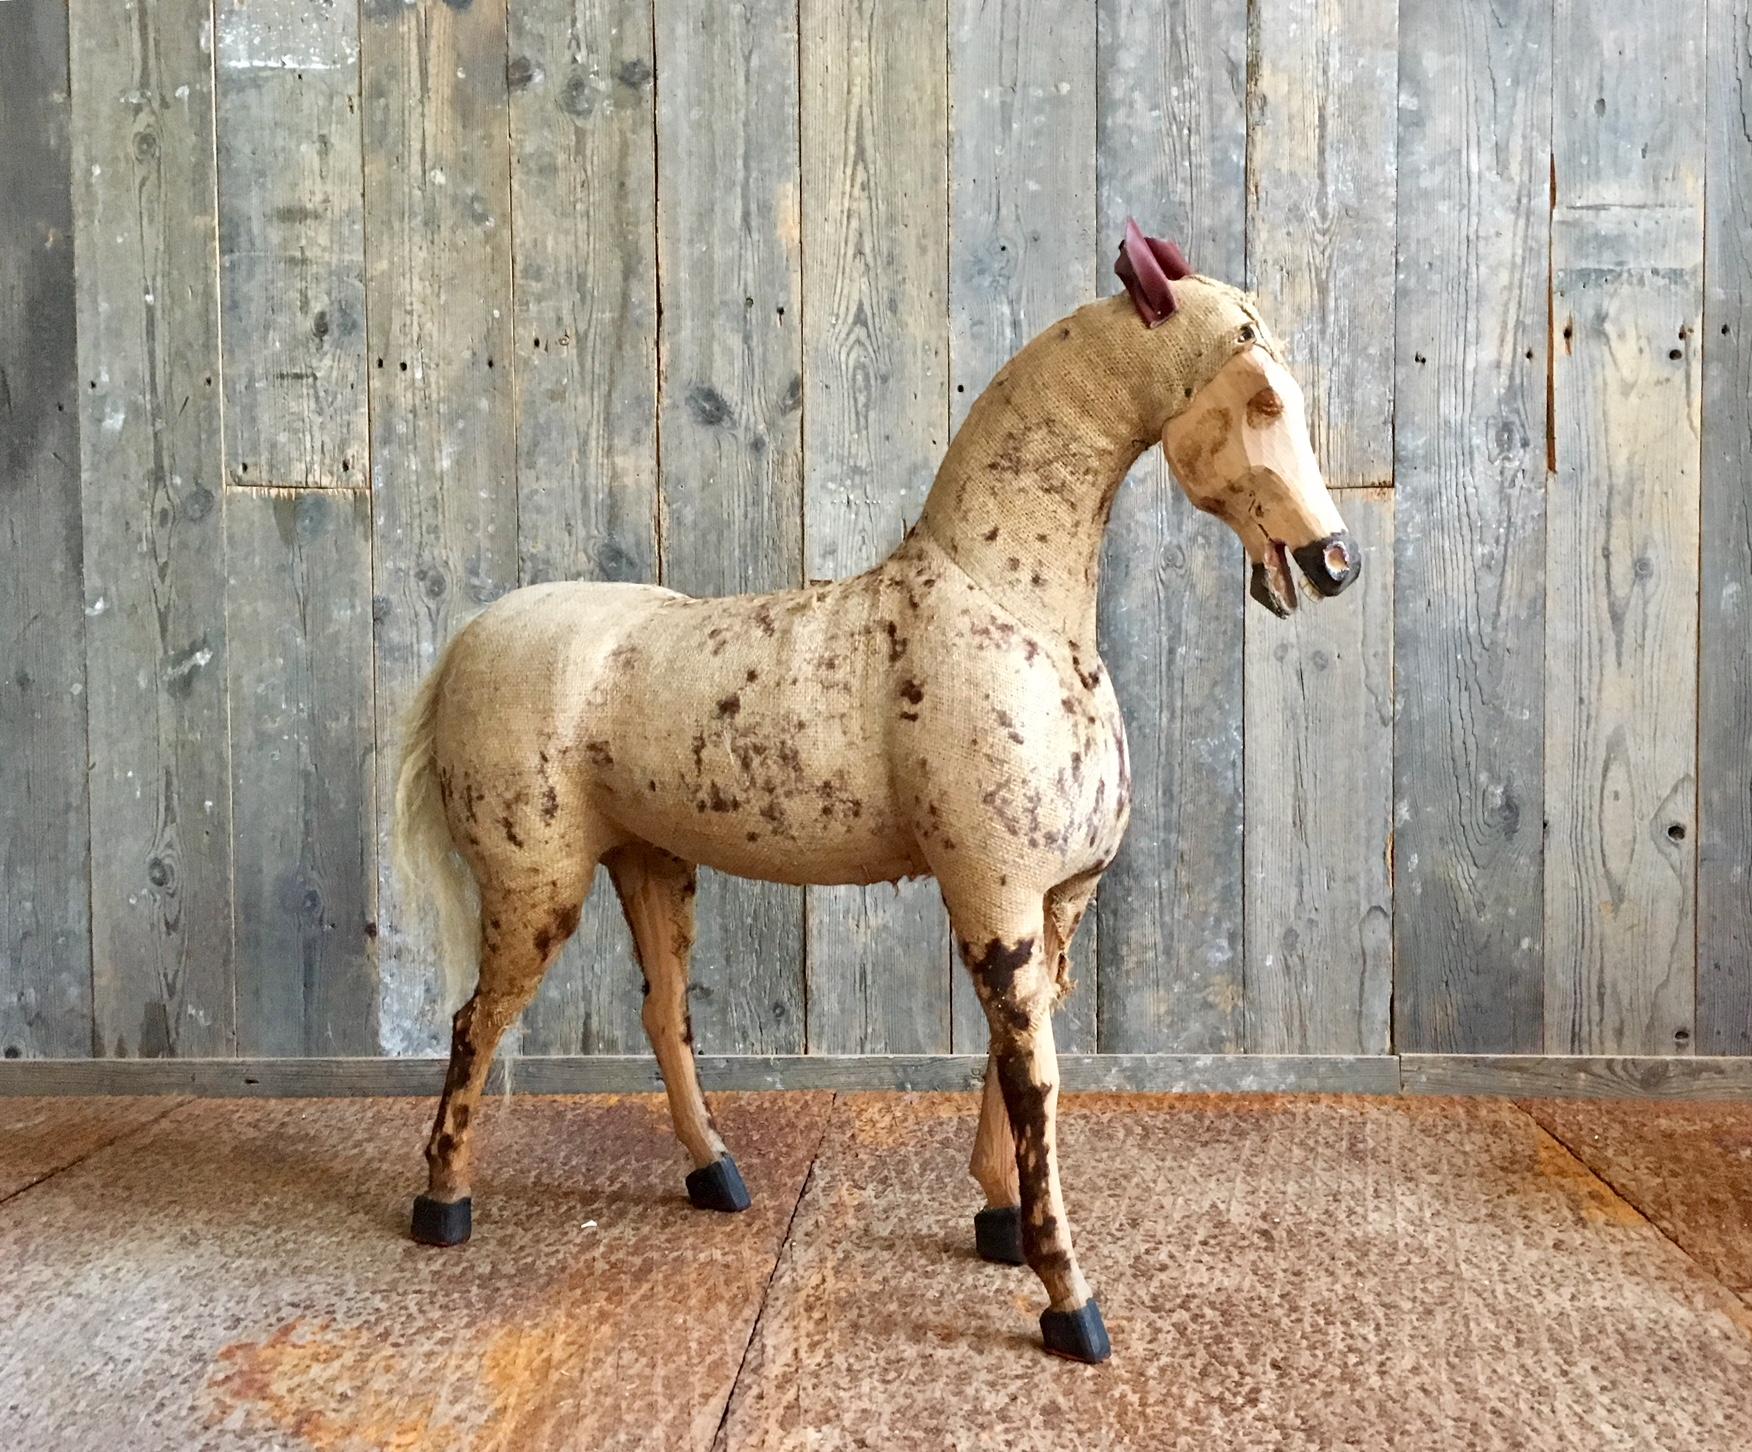 Decorative vintage horse in worn burlap, leather and wood. This horse used to be covered in a fur fabric but only parts of this fabric remain. What's left gives the horse a beautiful vintage, worn and weathered look. 

The horse is 84 cm in height